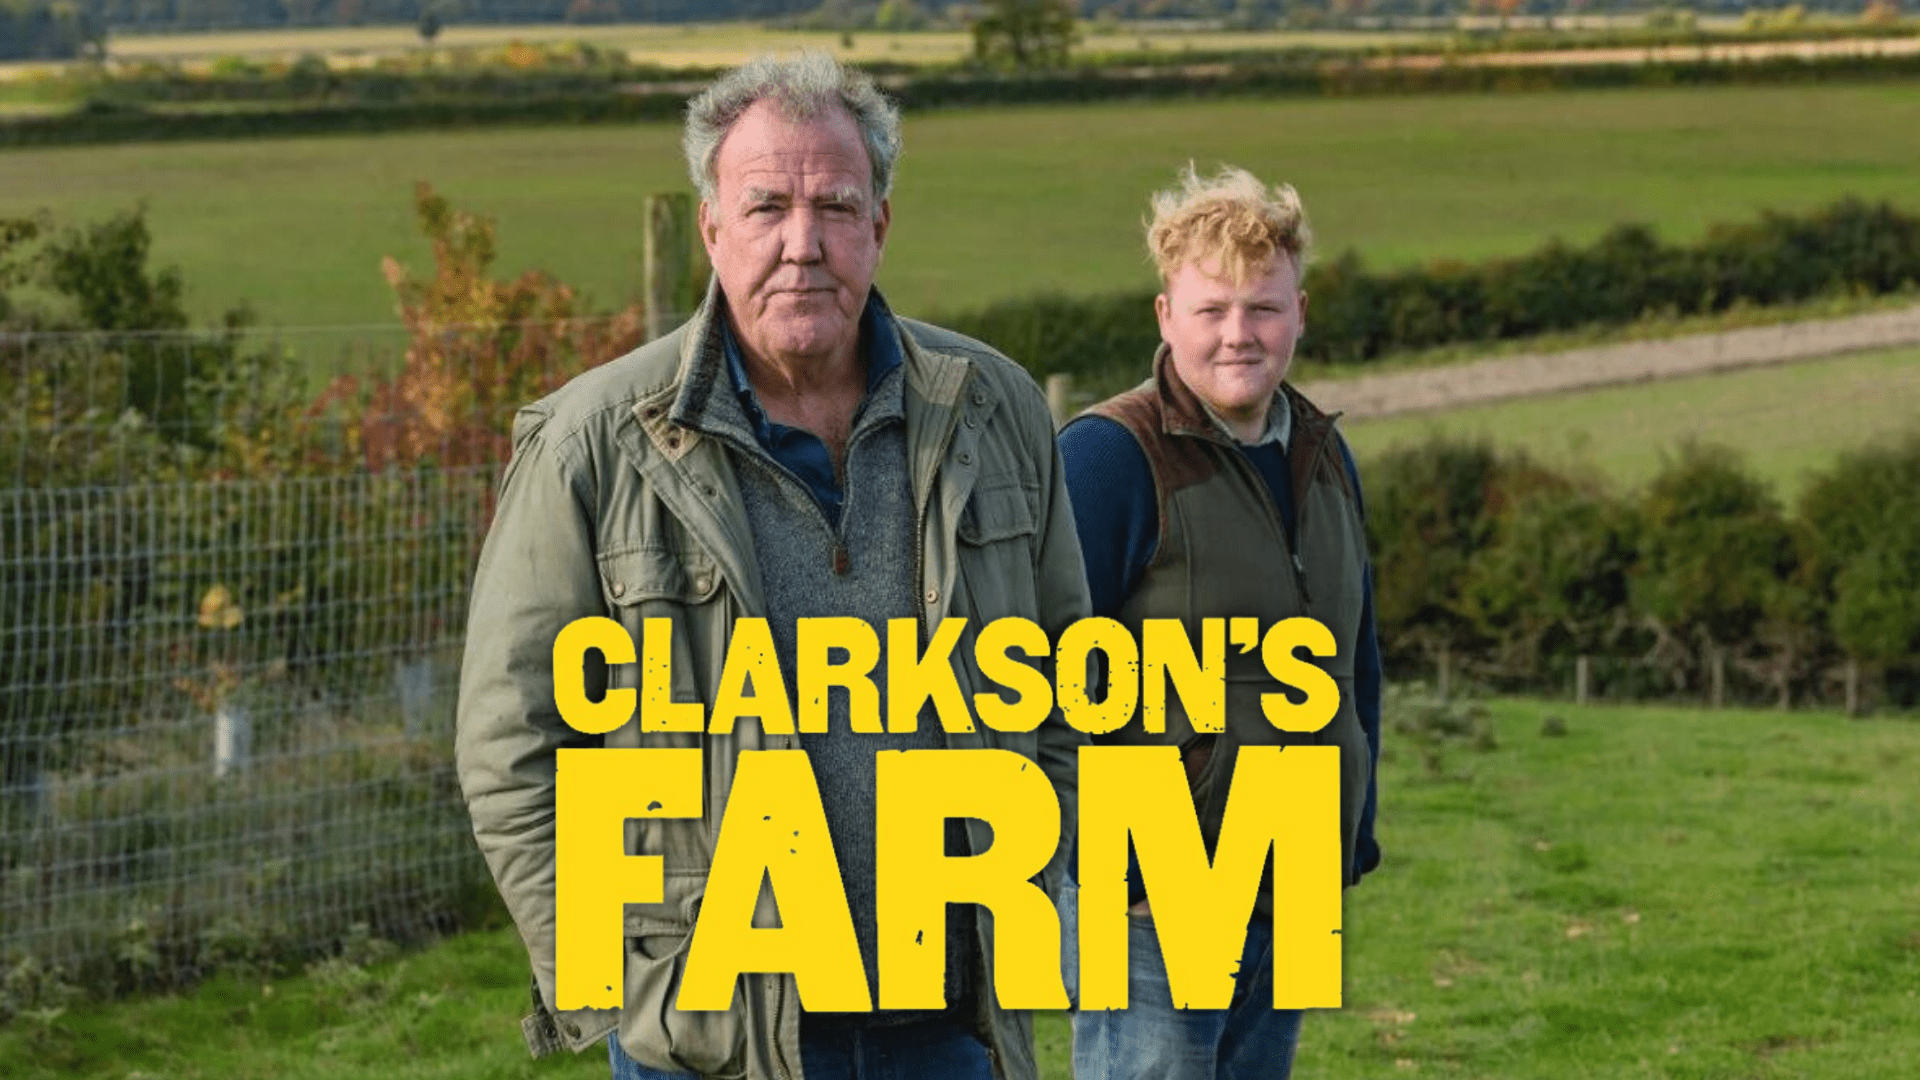 Clarkson's Farm Facts - 24 Clarkson's Farm Facts About Diddly Squat And Jeremy Clarkson